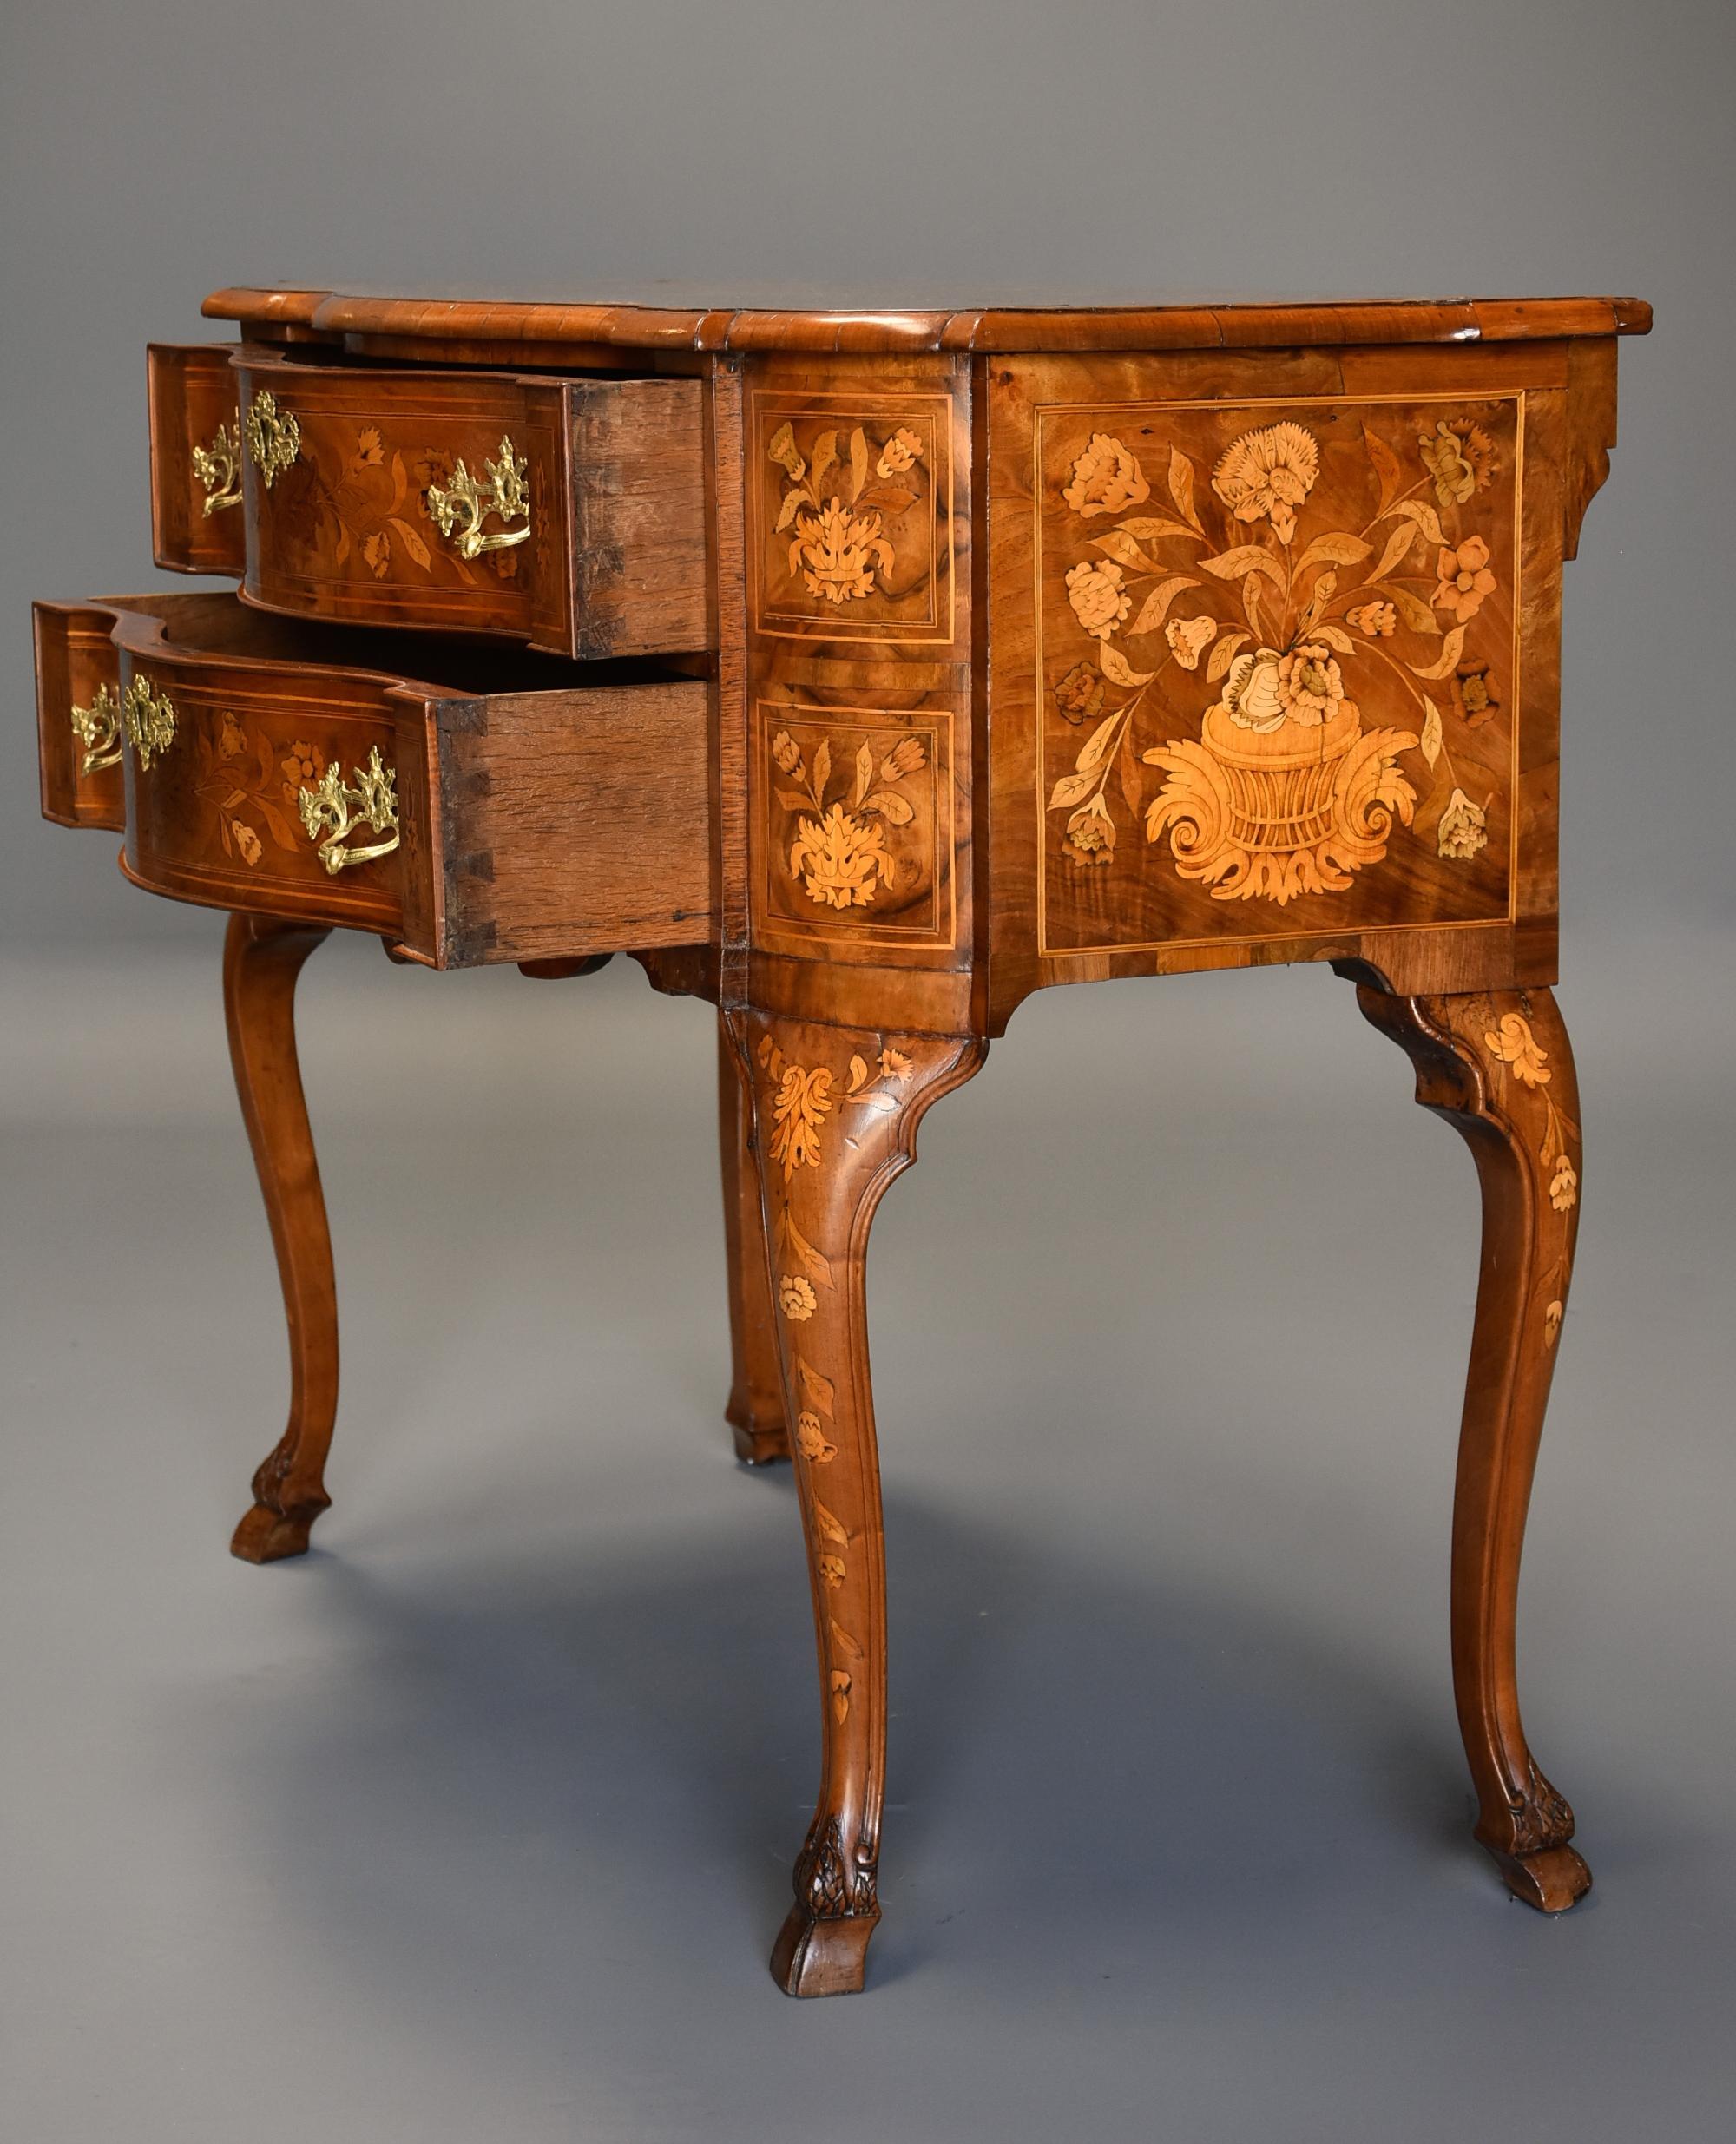 Fine Quality Mid-19th Century Floral Marquetry Walnut Lowboy of Serpentine Form For Sale 5